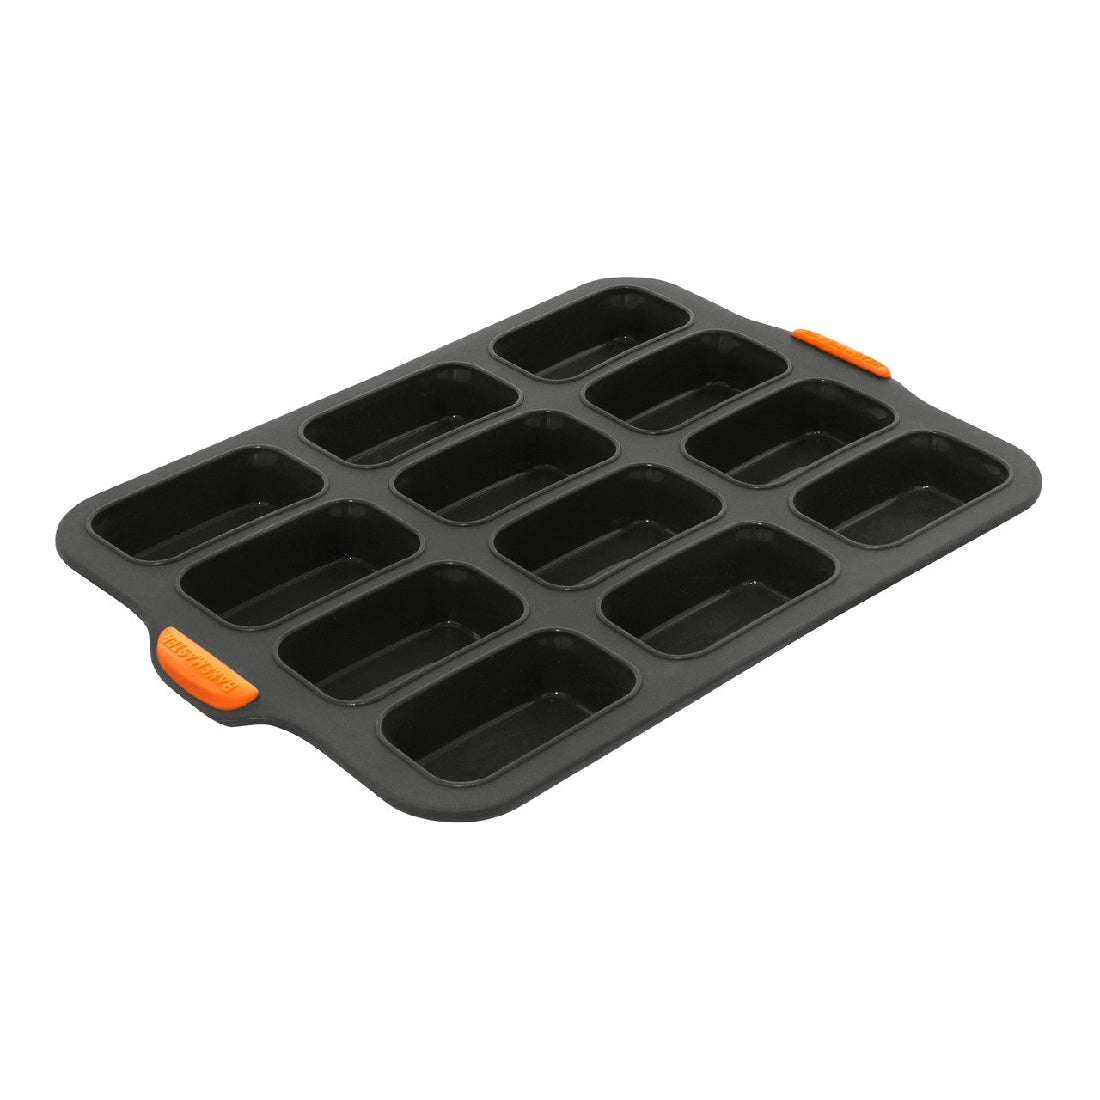 Bakemaster Silicone 12 Cup Mini Loaf 35.5x24.5cm